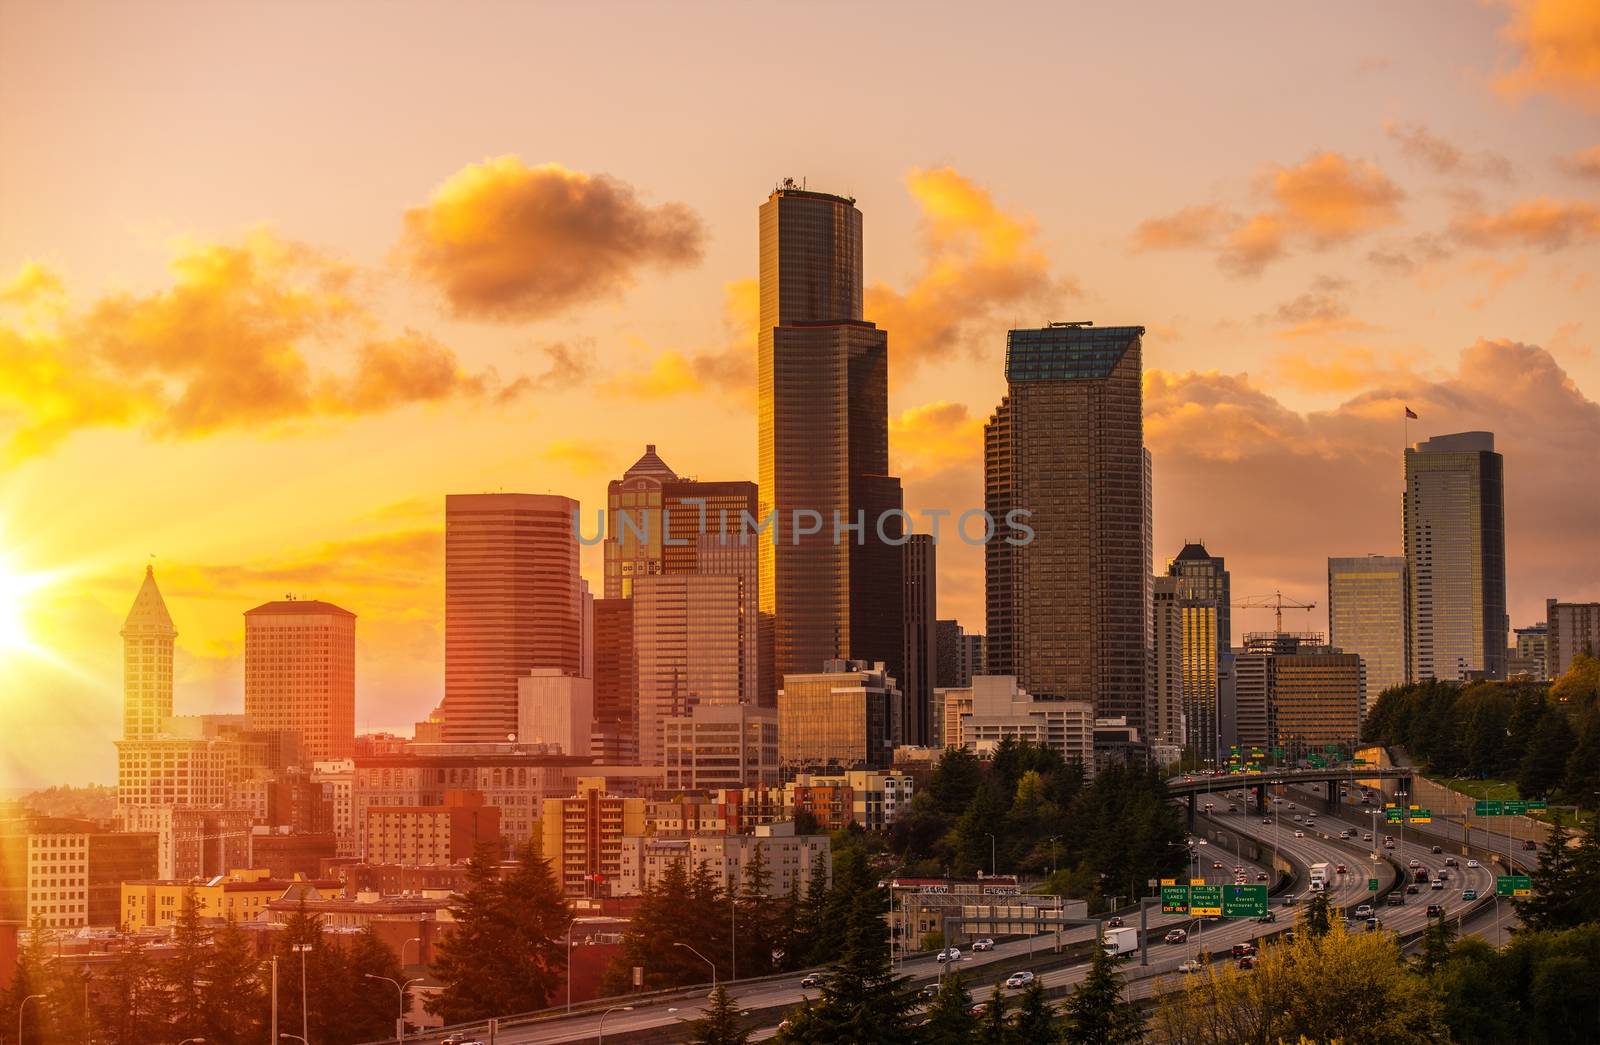 Seattle Scenic Sunset with Colorful Clouds. Seattle, Washington, United States.